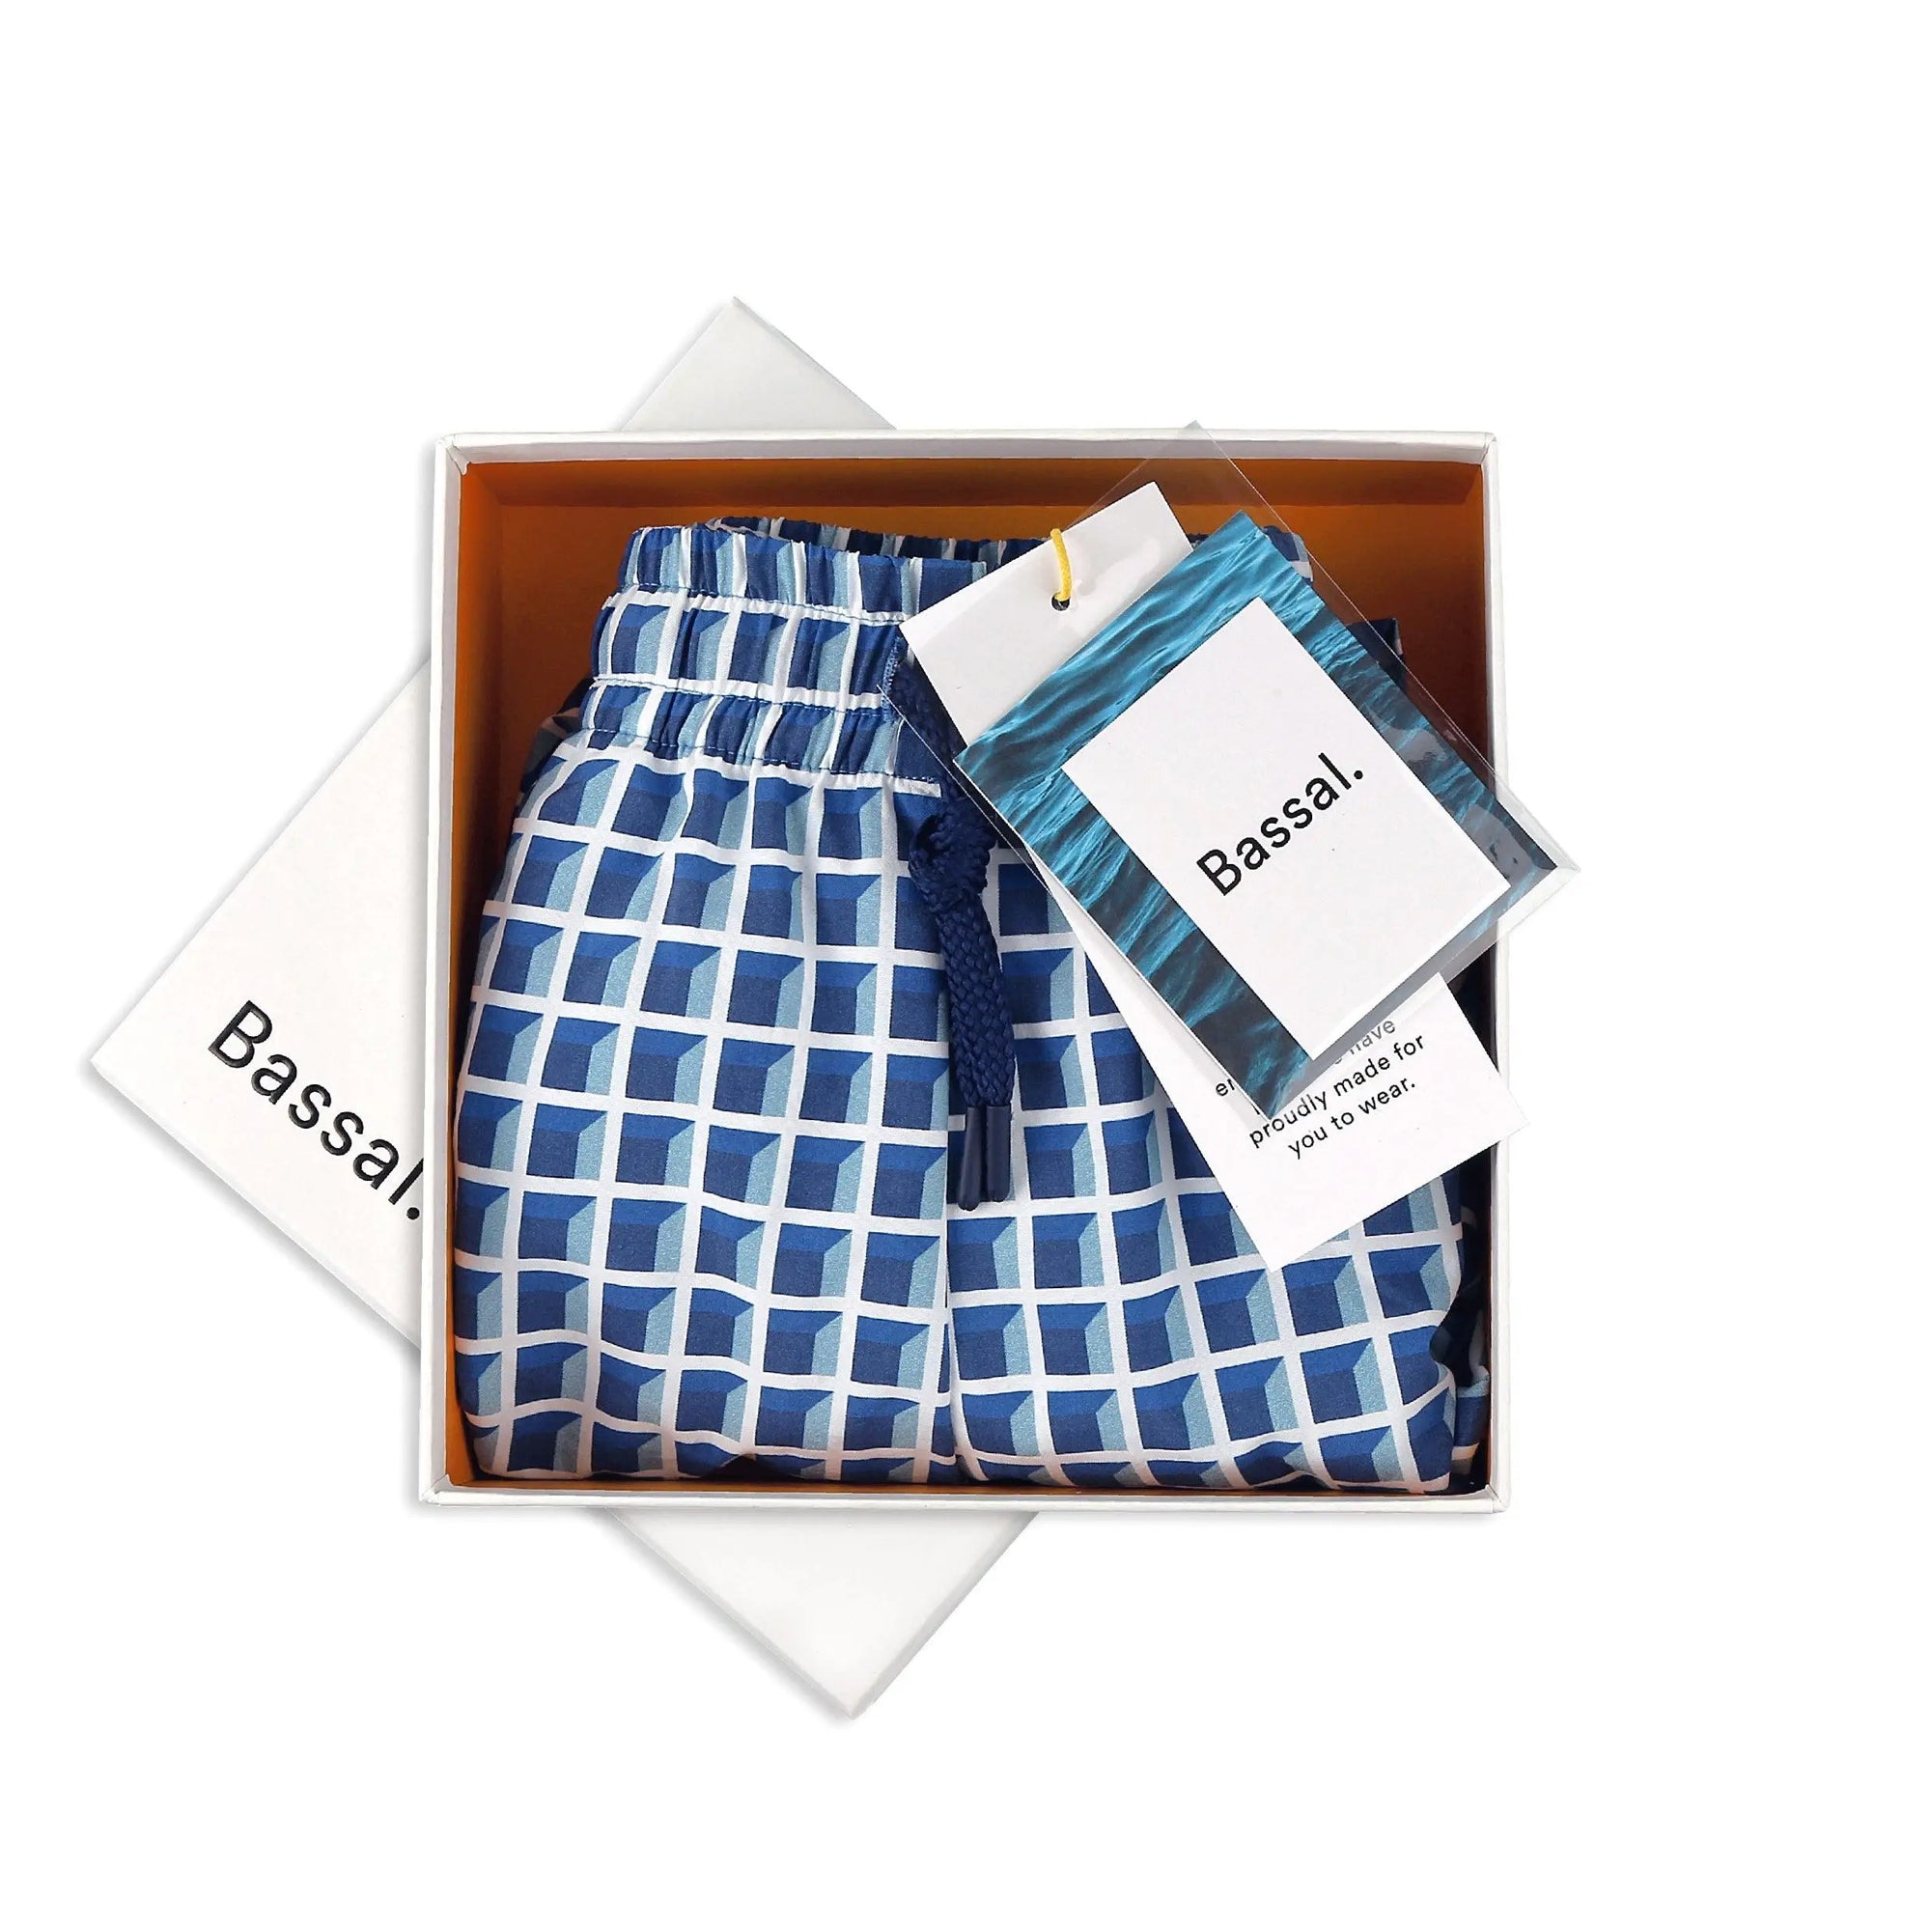 A pair of Window Blue Swimwear are neatly folded inside an orange gift box with the brand name "Bassal" on the lid and tags. The swimwear features an elastic waistband with a blue drawstring. Another white box with "BassalStore" is partially visible underneath, hinting at a chic store experience in Barcelona.